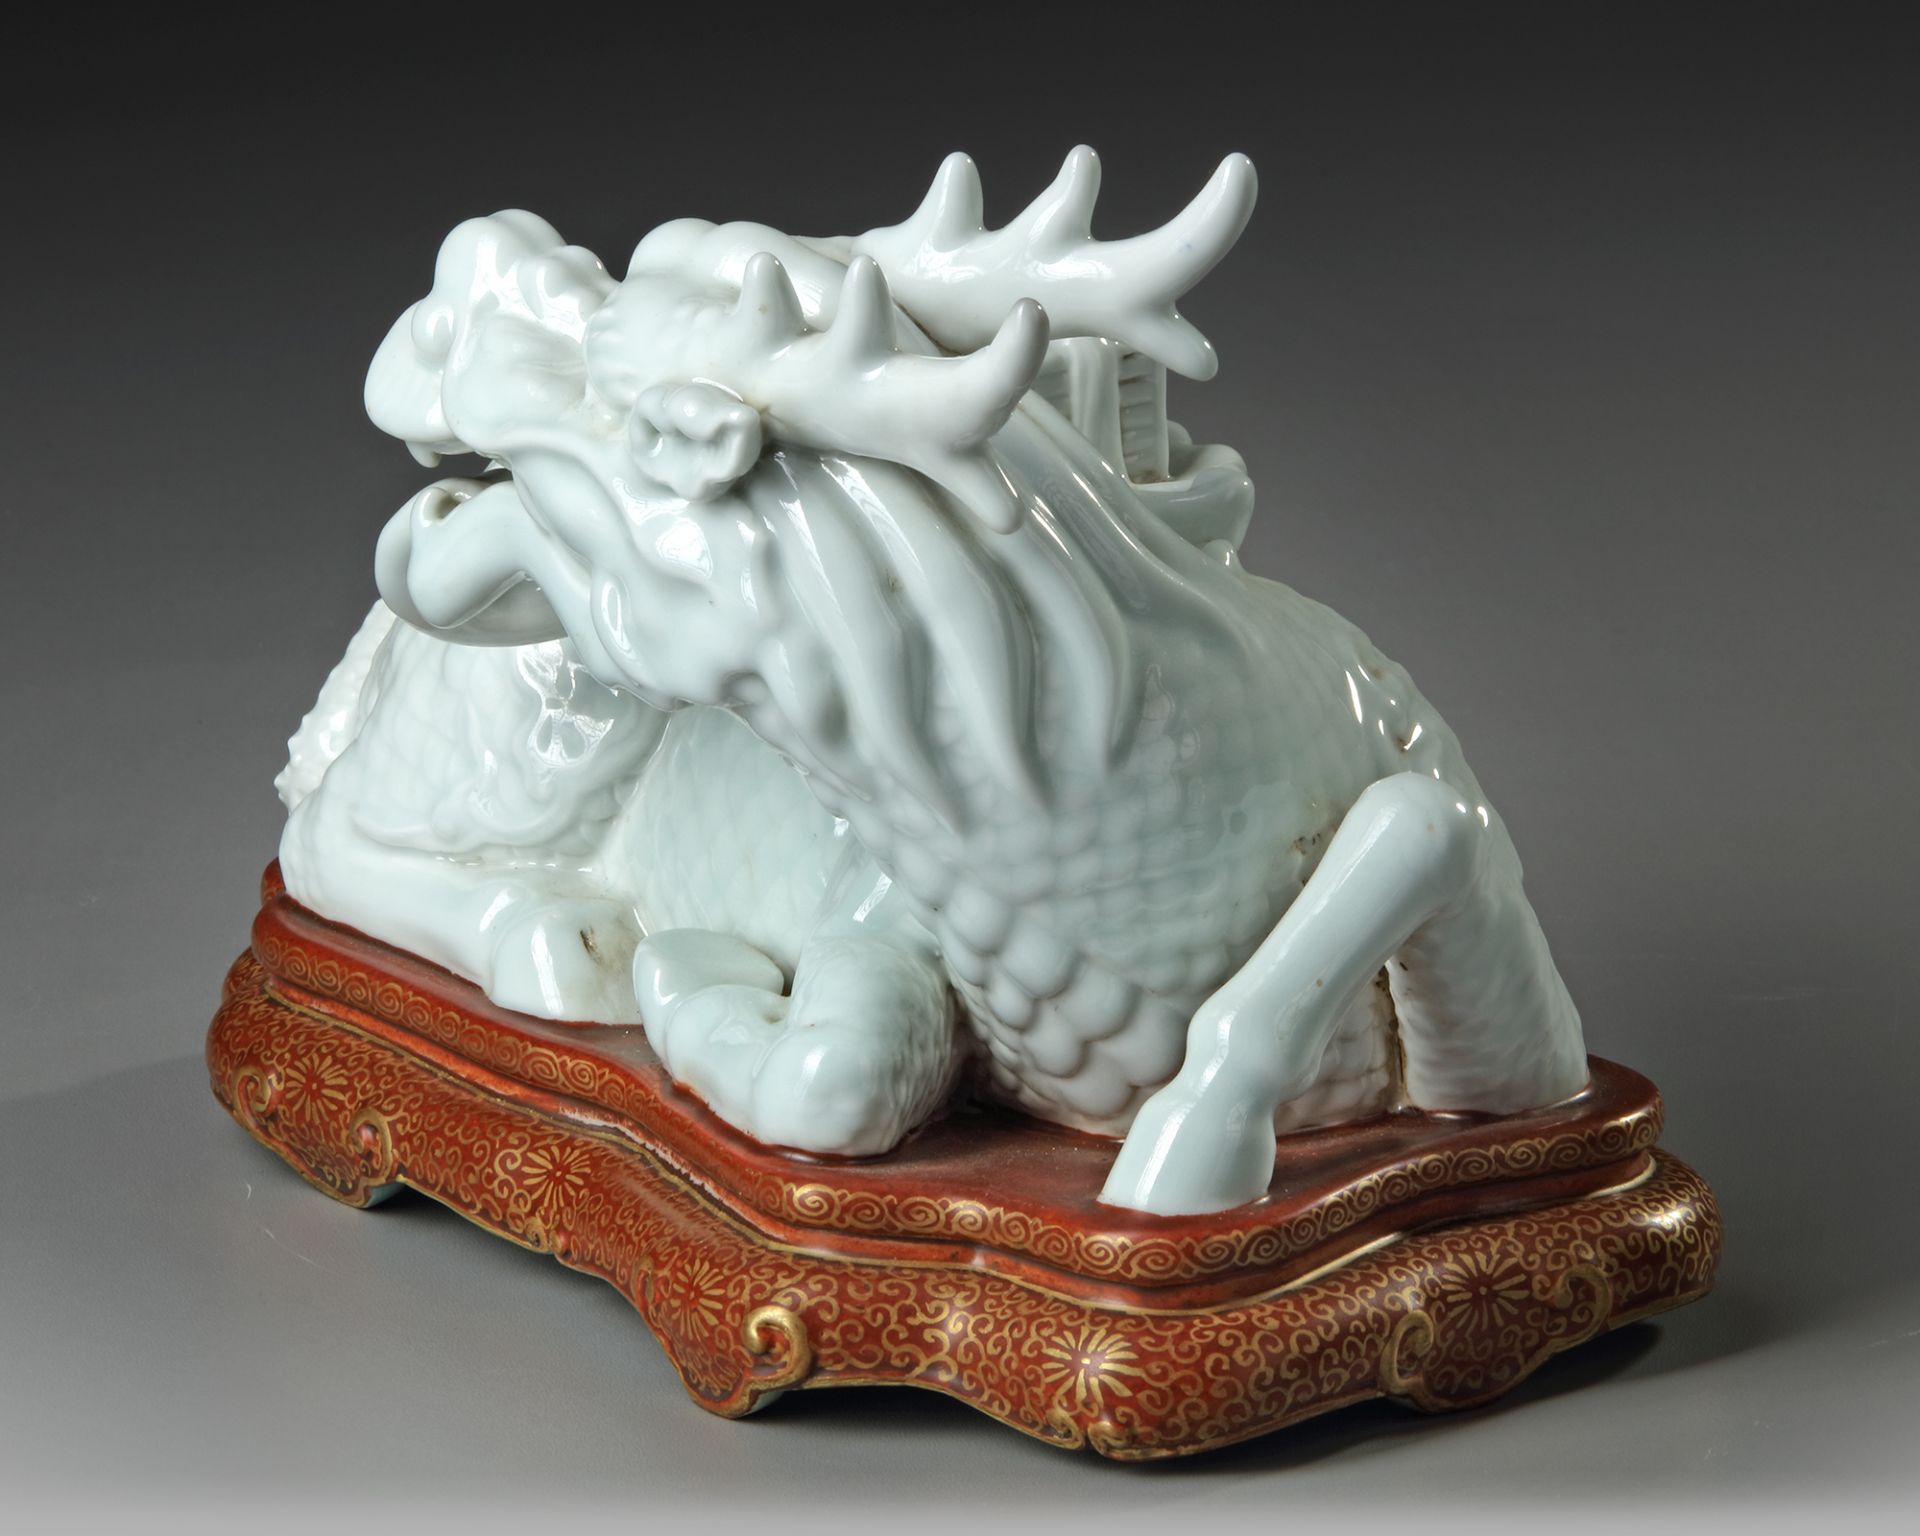 A CHINESE WHITE GLAZED SEATED DRAGON, QING DYNASTY (1644–1911) - Image 4 of 5